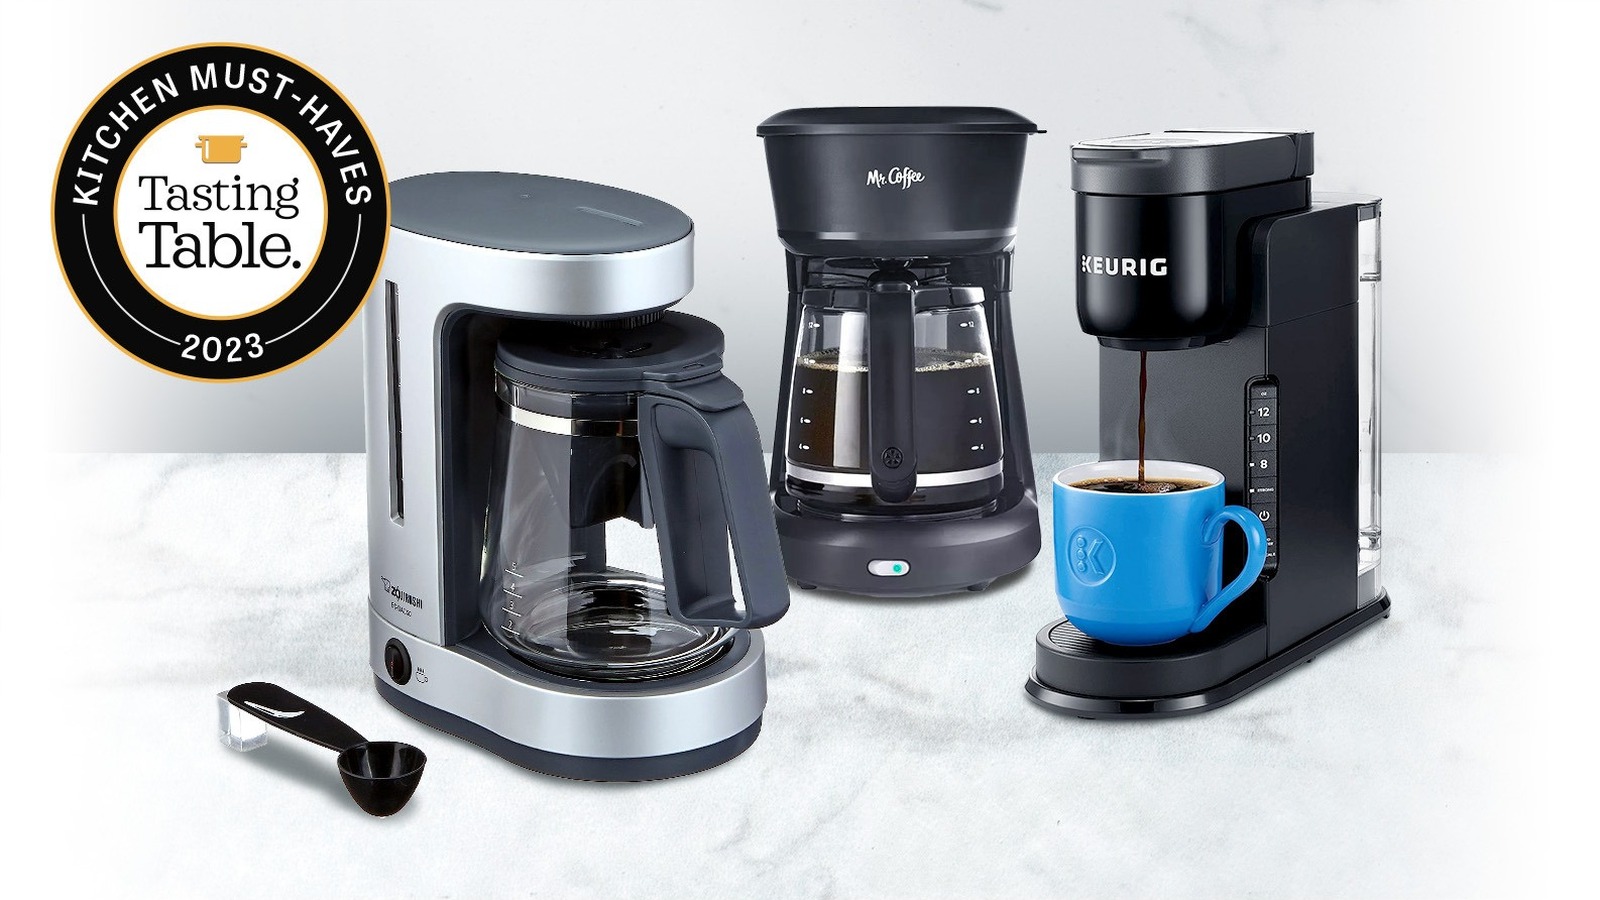 8 Best Coffeemakers 2023 Reviewed, Shopping : Food Network